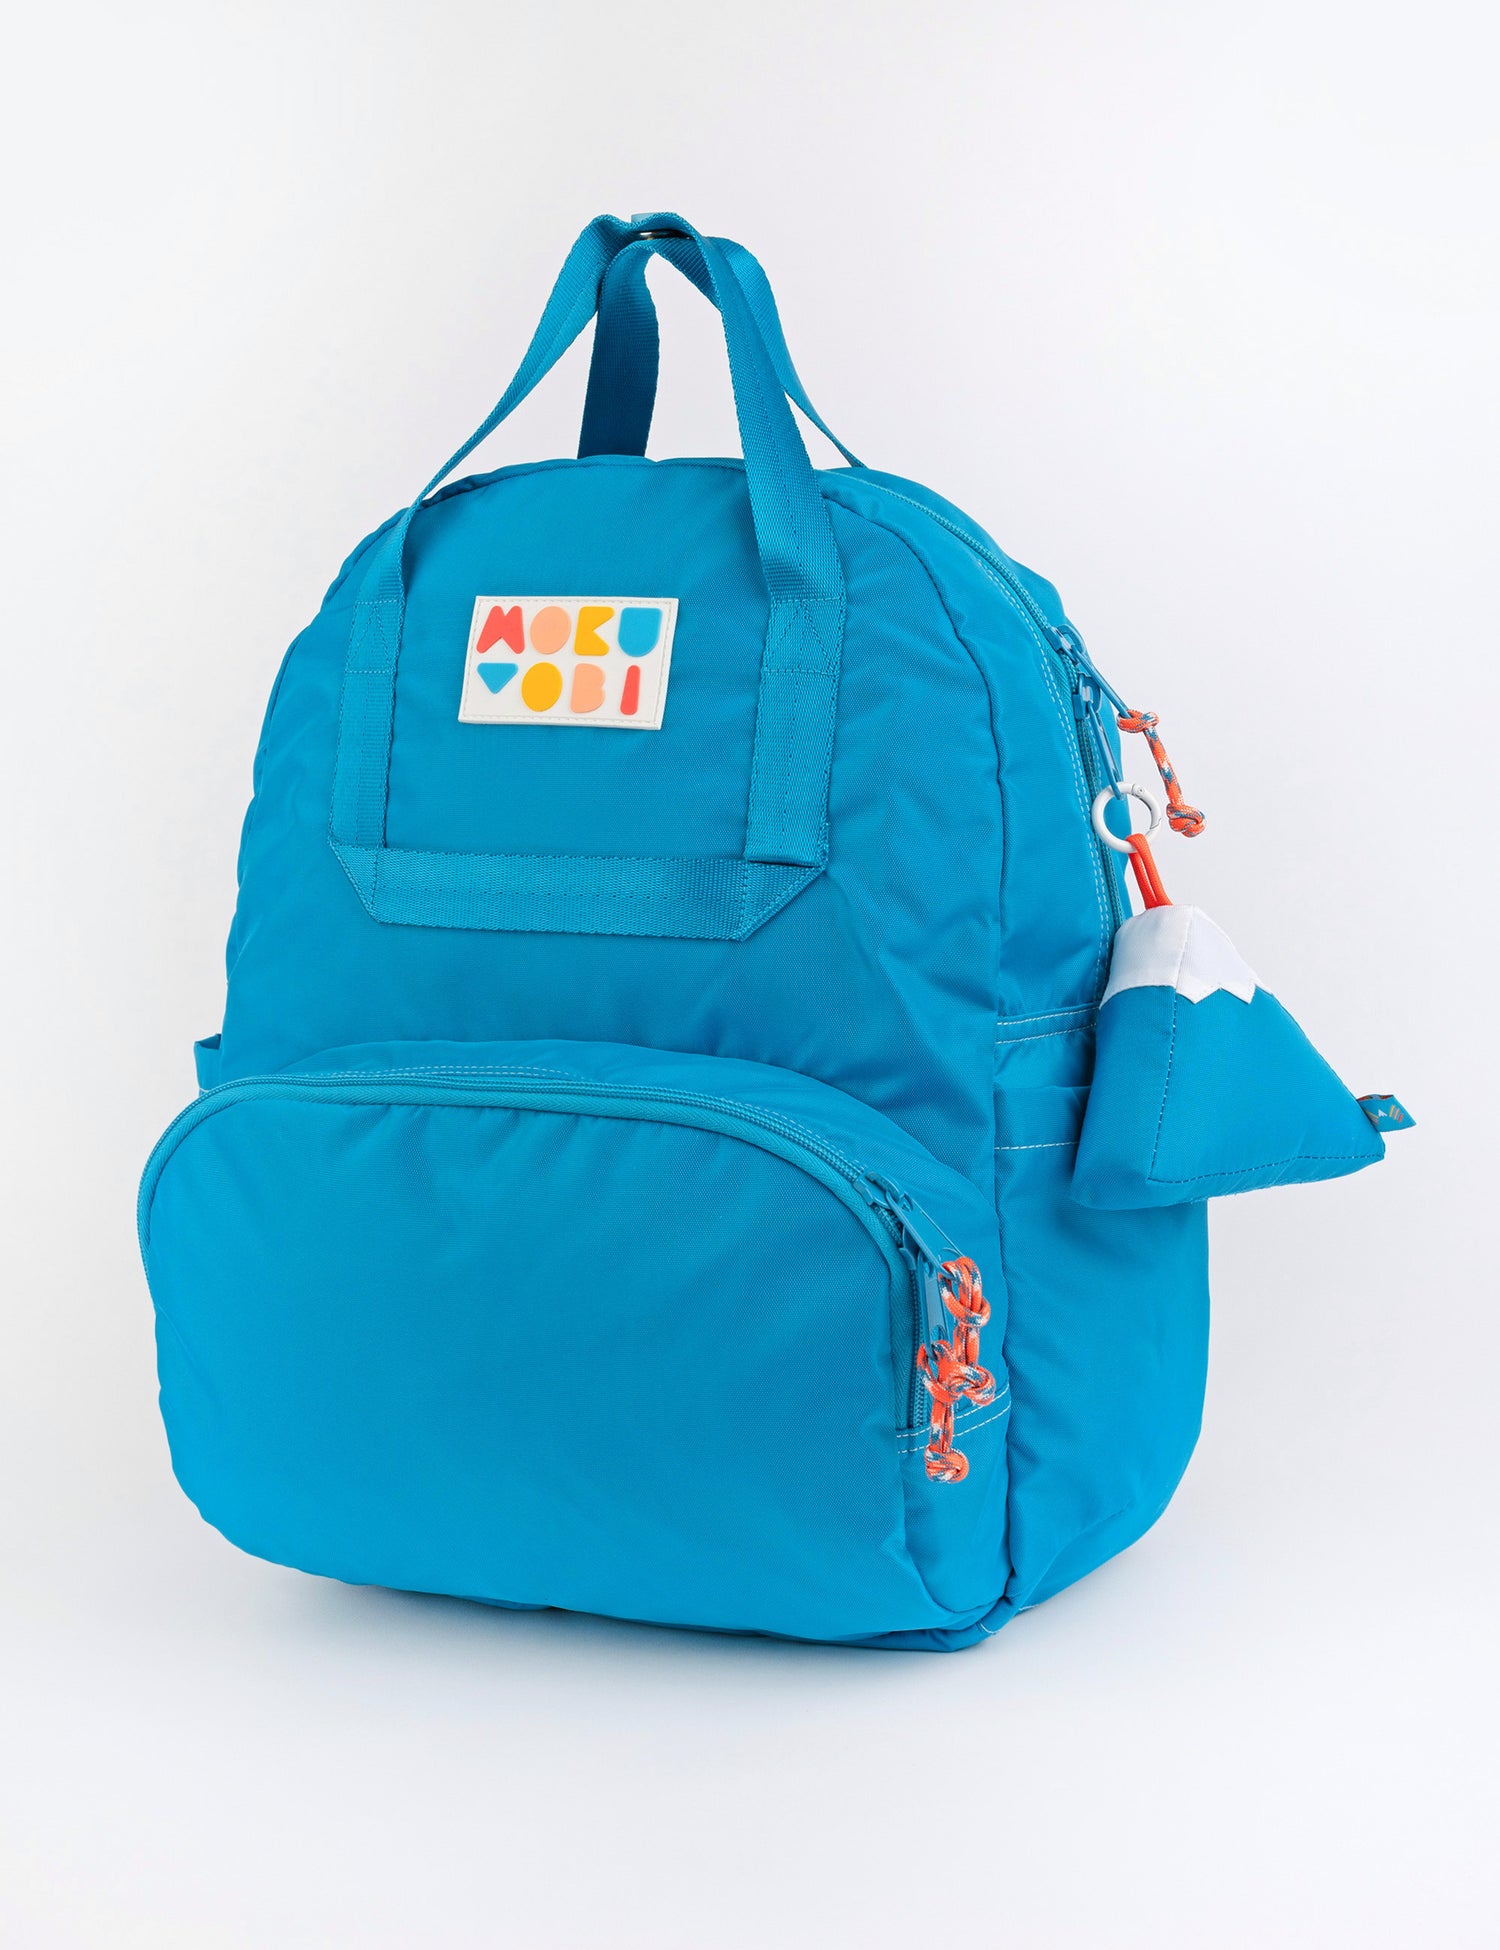 An aqua blue colored backpack with a mountain keychain accessory